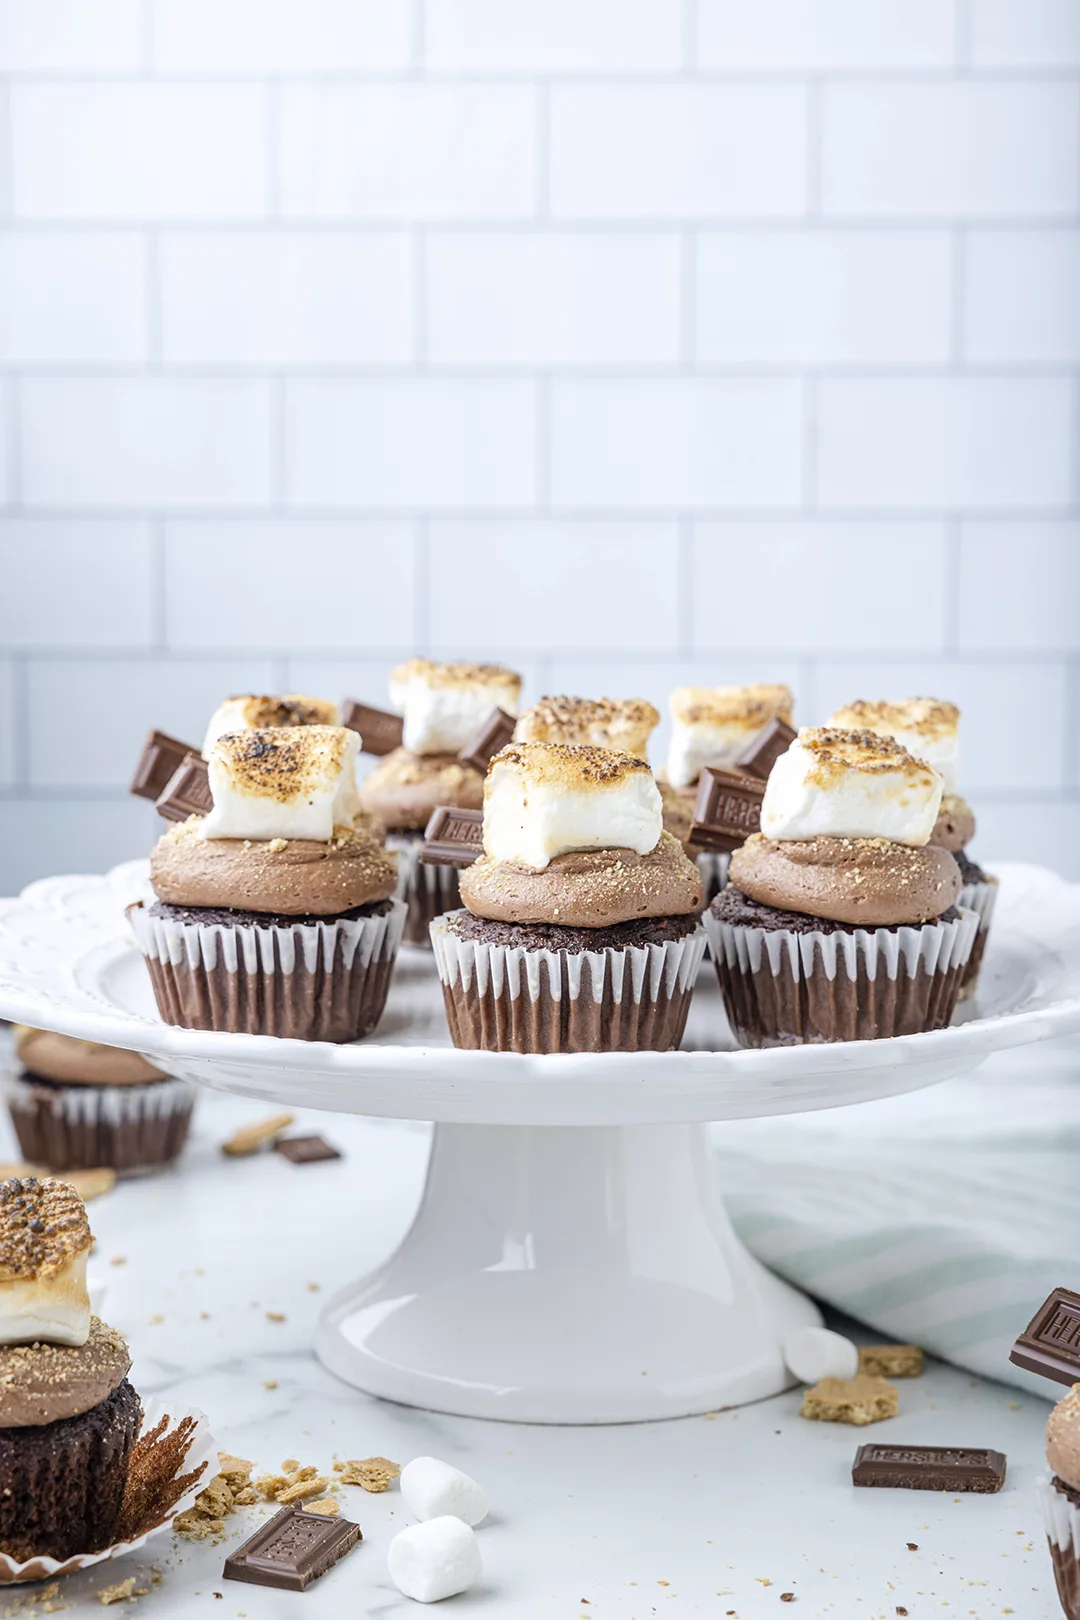 smores cupcakes being served on a white ceramic cake stand. delicious s'mores cupcakes topped with square toasted marshmallows